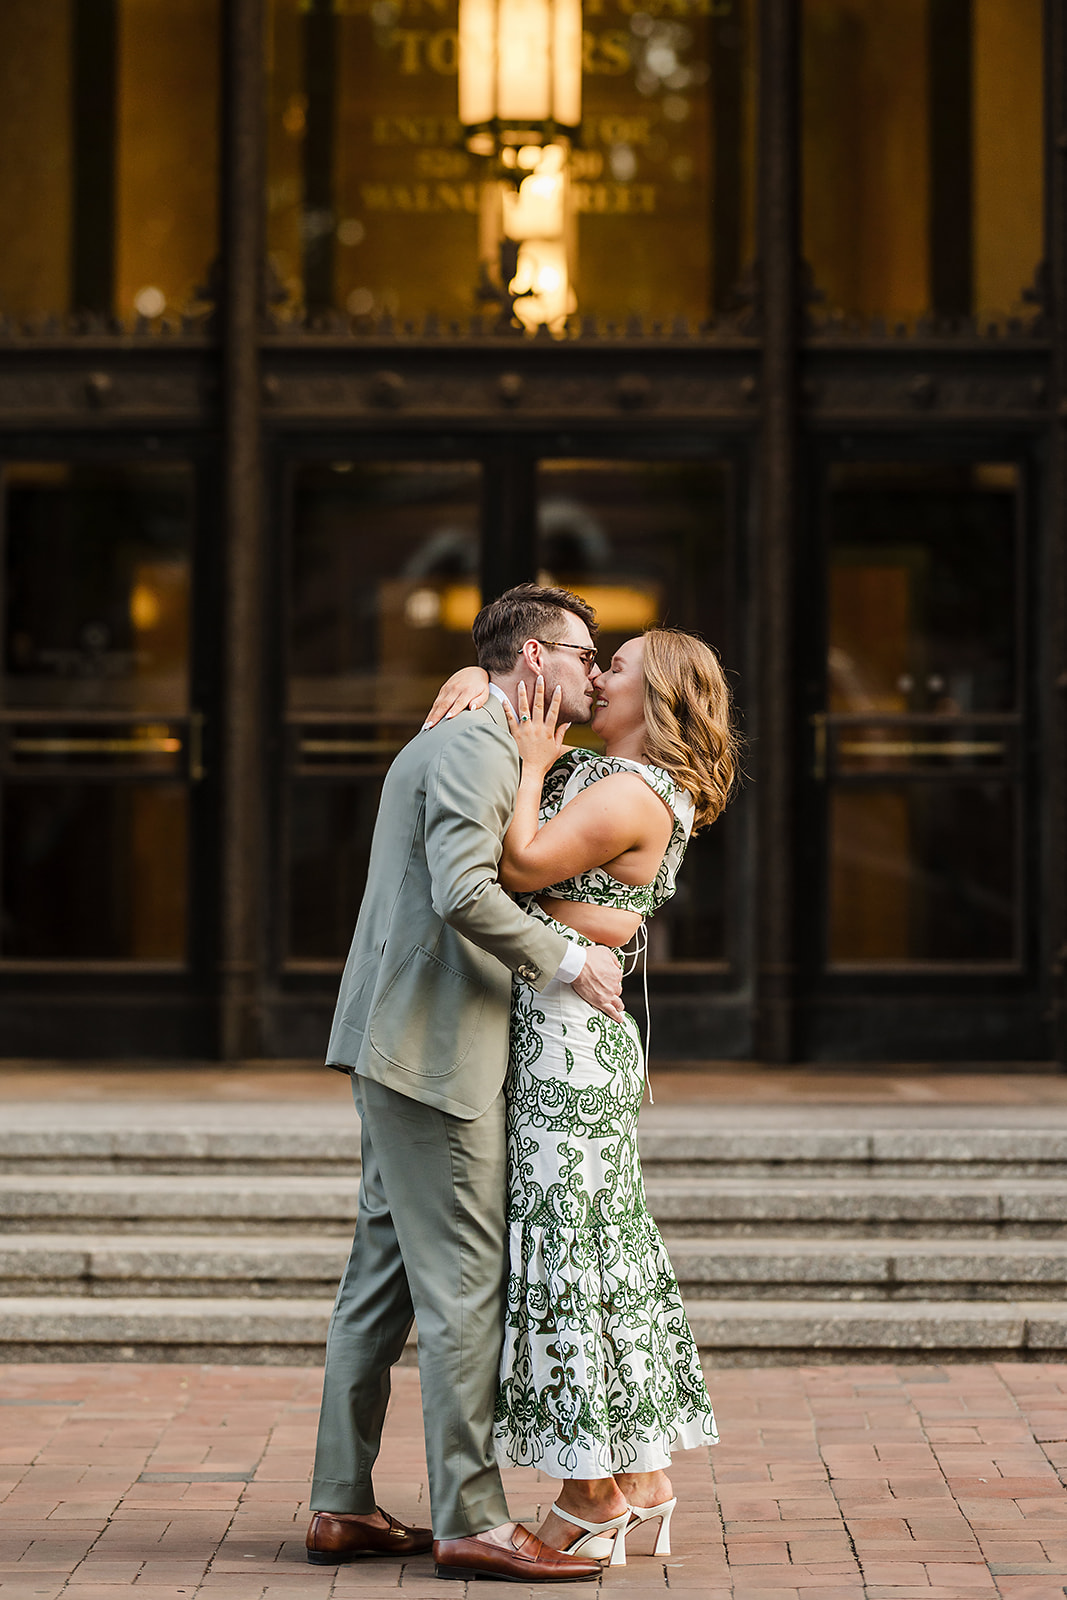 Philadelphia Old City is a stunning location for engagement sessions near Washington square park